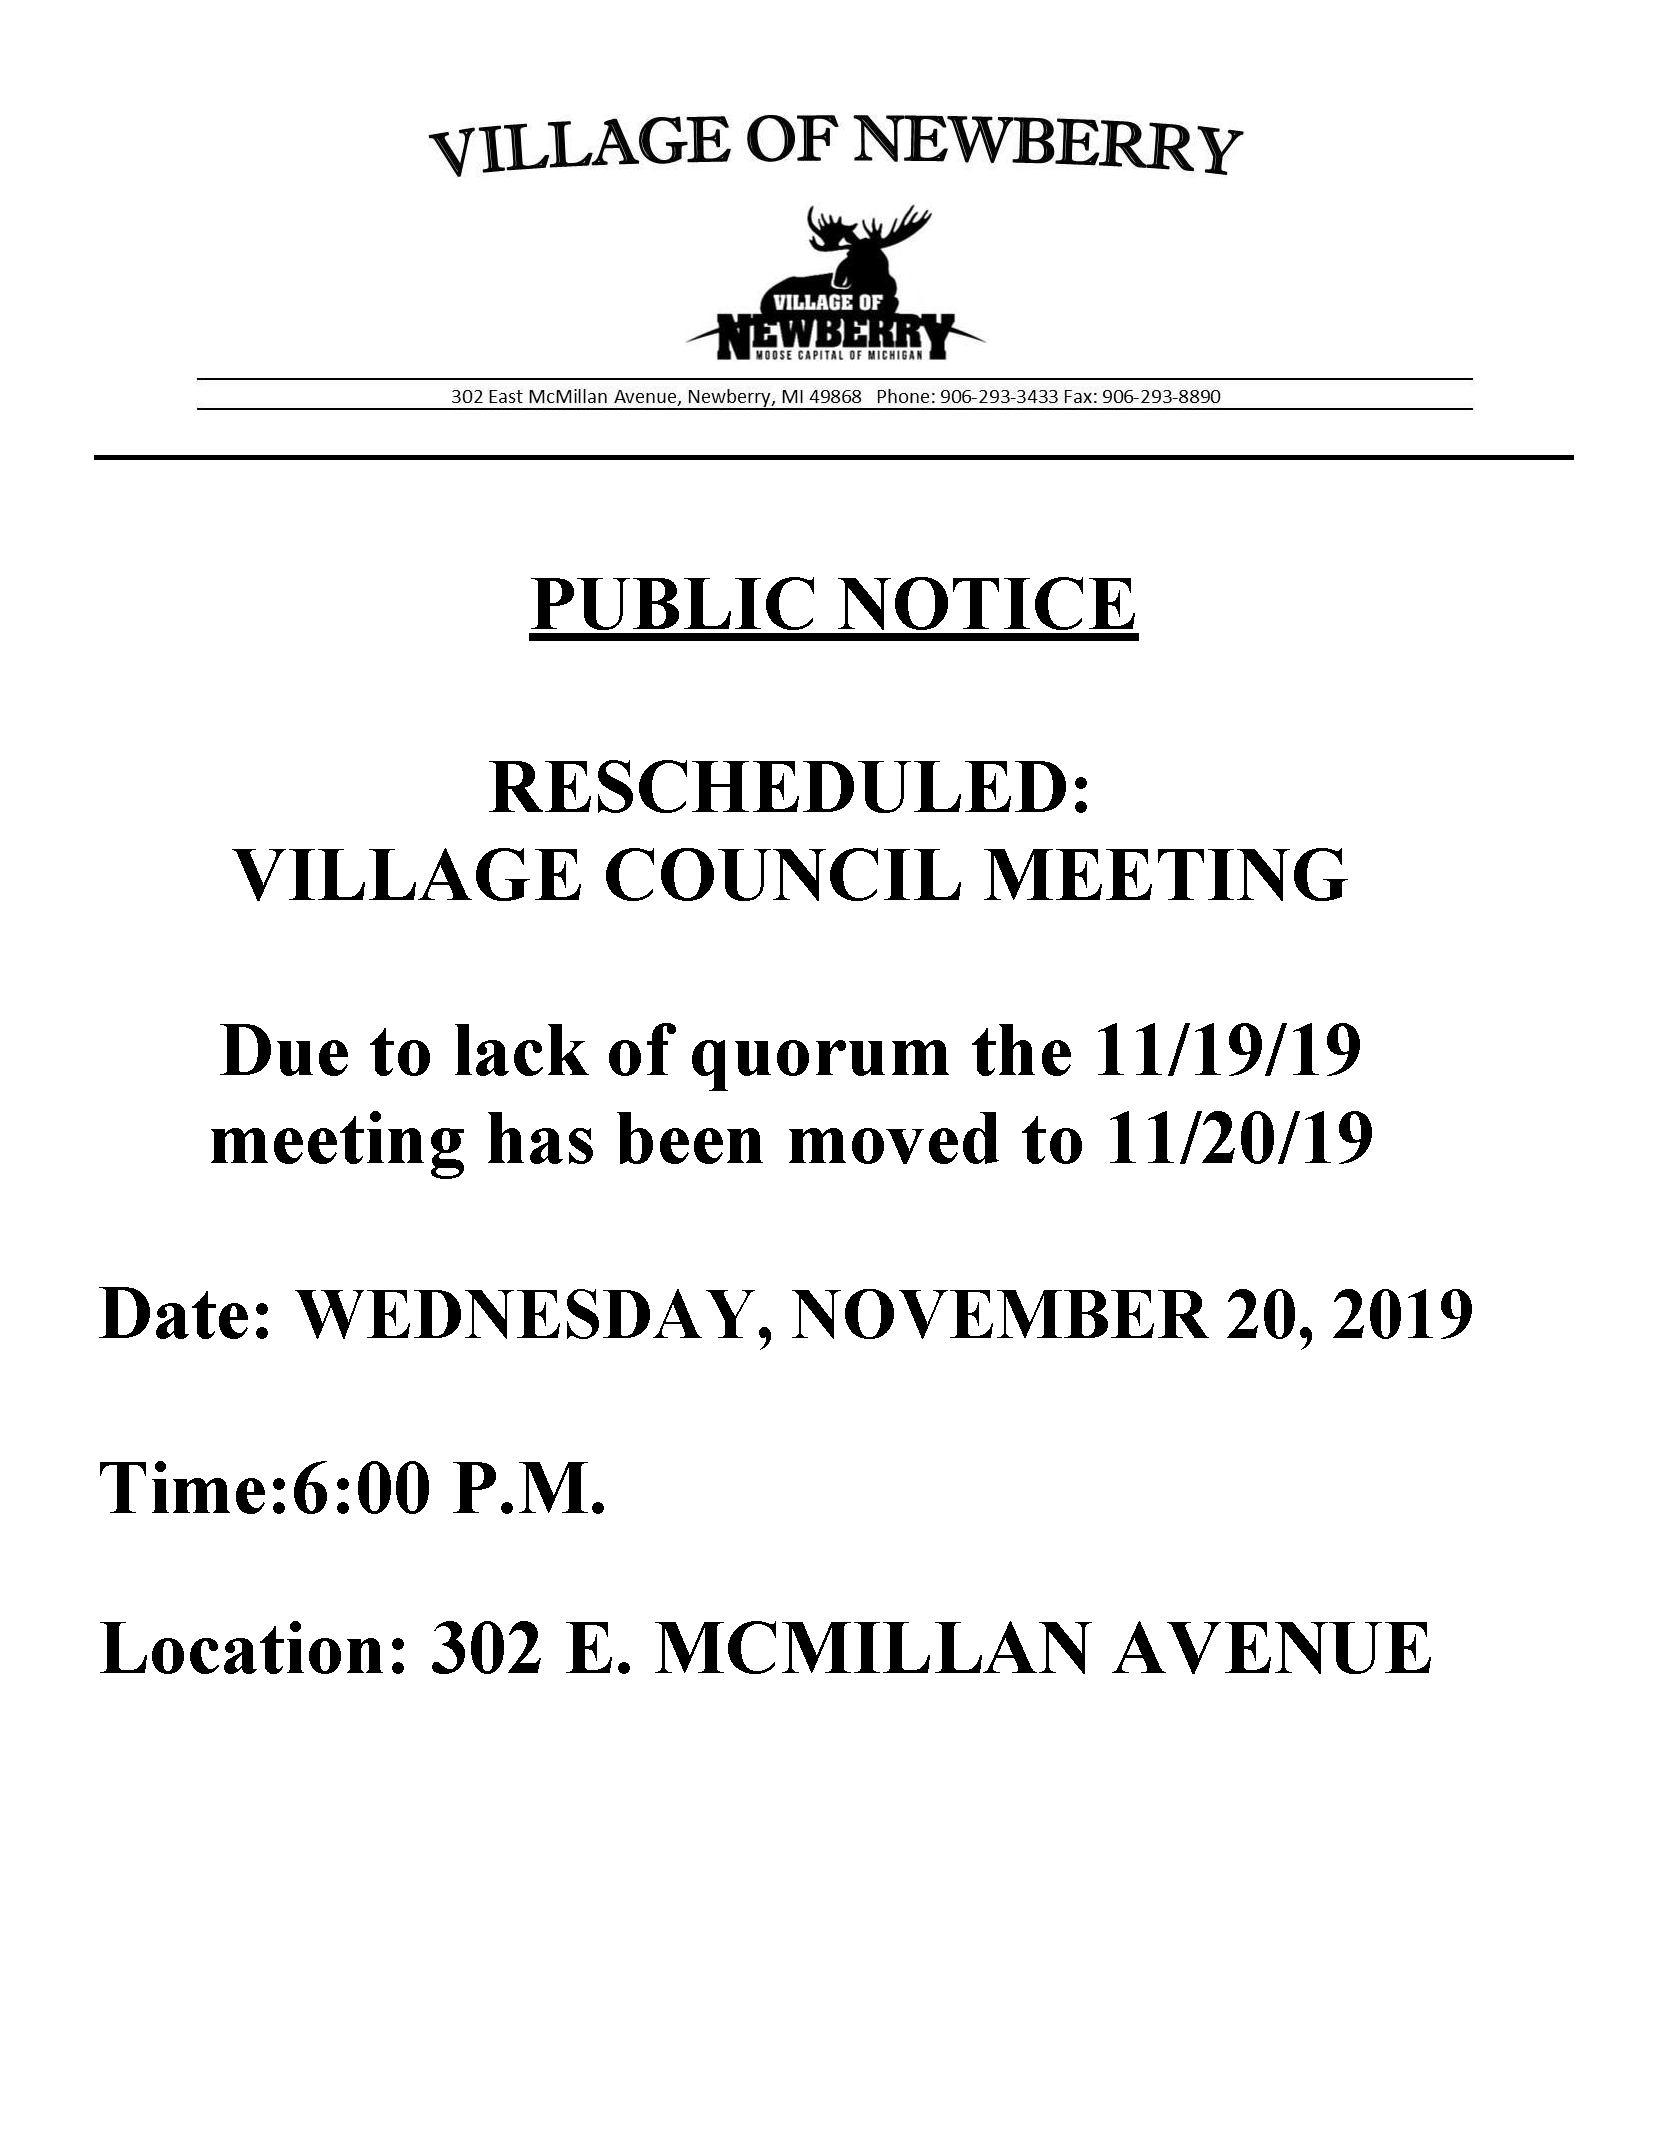 Council__Meeting_Date_Change_11.20.19